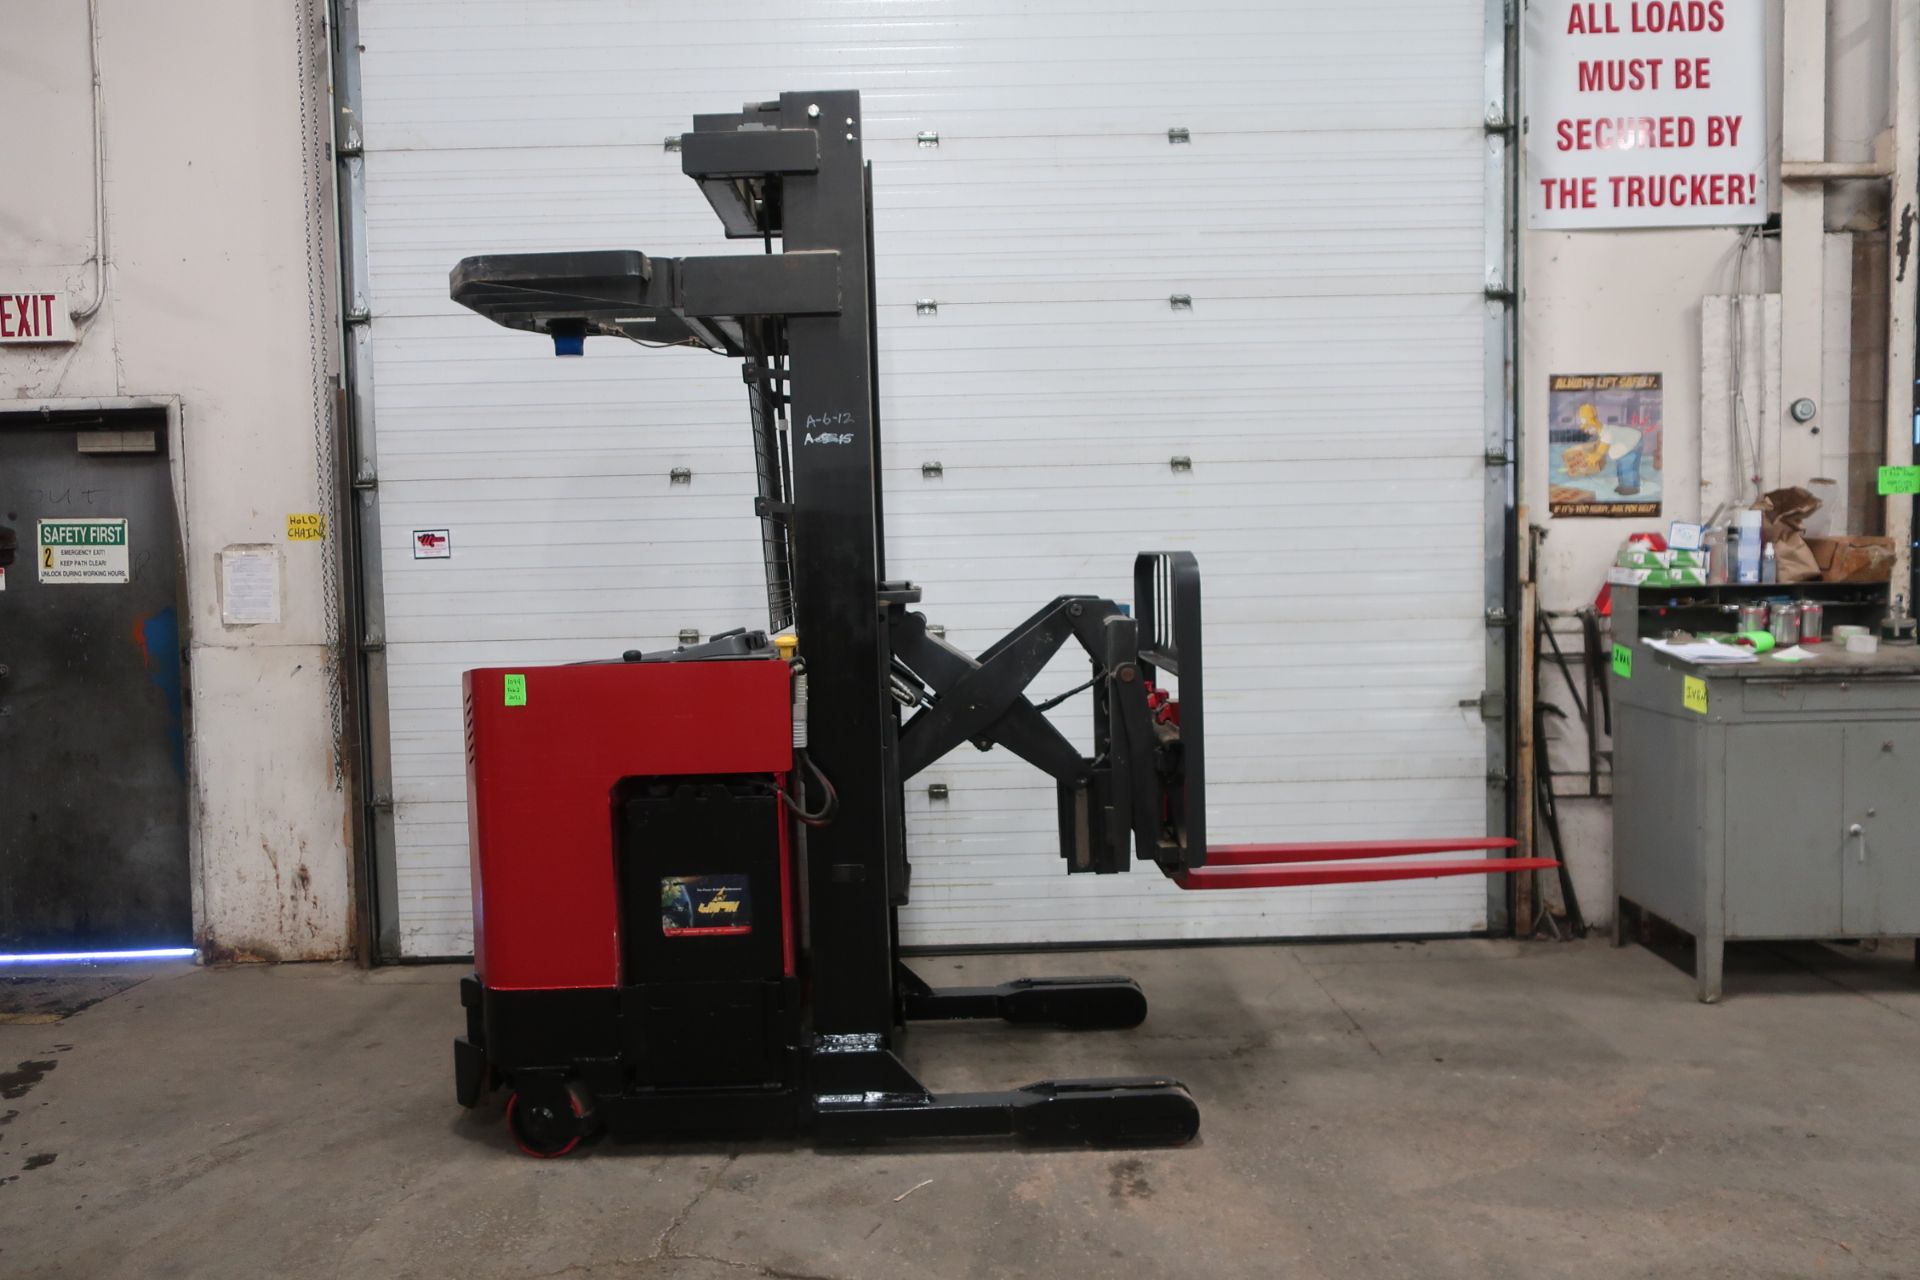 FREE CUSTOMS - 2011 Raymond Reach EXTENDED REACH Truck 4000lbs capacity with sideshift Pallet Lifter